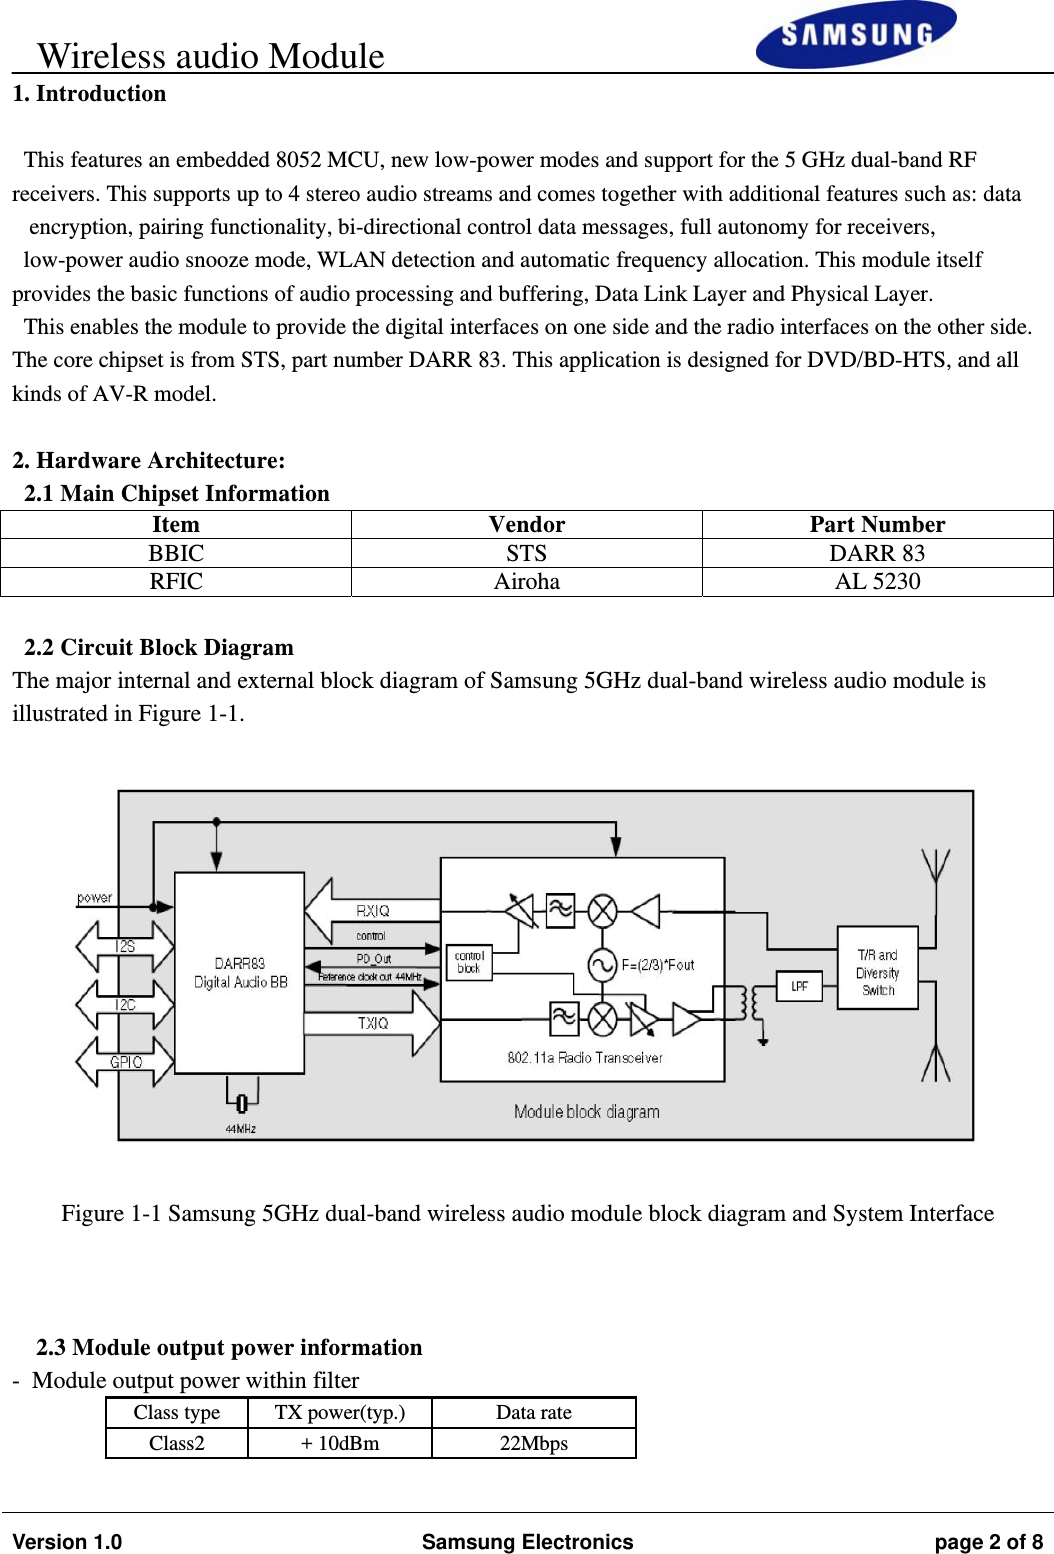     Wireless audio Module                                                                        Version 1.0  Samsung Electronics  page 2 of 8   1. Introduction  This features an embedded 8052 MCU, new low-power modes and support for the 5 GHz dual-band RF receivers. This supports up to 4 stereo audio streams and comes together with additional features such as: data   encryption, pairing functionality, bi-directional control data messages, full autonomy for receivers, low-power audio snooze mode, WLAN detection and automatic frequency allocation. This module itself provides the basic functions of audio processing and buffering, Data Link Layer and Physical Layer. This enables the module to provide the digital interfaces on one side and the radio interfaces on the other side. The core chipset is from STS, part number DARR 83. This application is designed for DVD/BD-HTS, and all kinds of AV-R model.  2. Hardware Architecture: 2.1 Main Chipset Information Item Vendor Part Number BBIC STS DARR 83 RFIC Airoha AL 5230  2.2 Circuit Block Diagram The major internal and external block diagram of Samsung 5GHz dual-band wireless audio module is illustrated in Figure 1-1.    Figure 1-1 Samsung 5GHz dual-band wireless audio module block diagram and System Interface    2.3 Module output power information -  Module output power within filter Class type  TX power(typ.)  Data rate  Class2 + 10dBm  22Mbps  